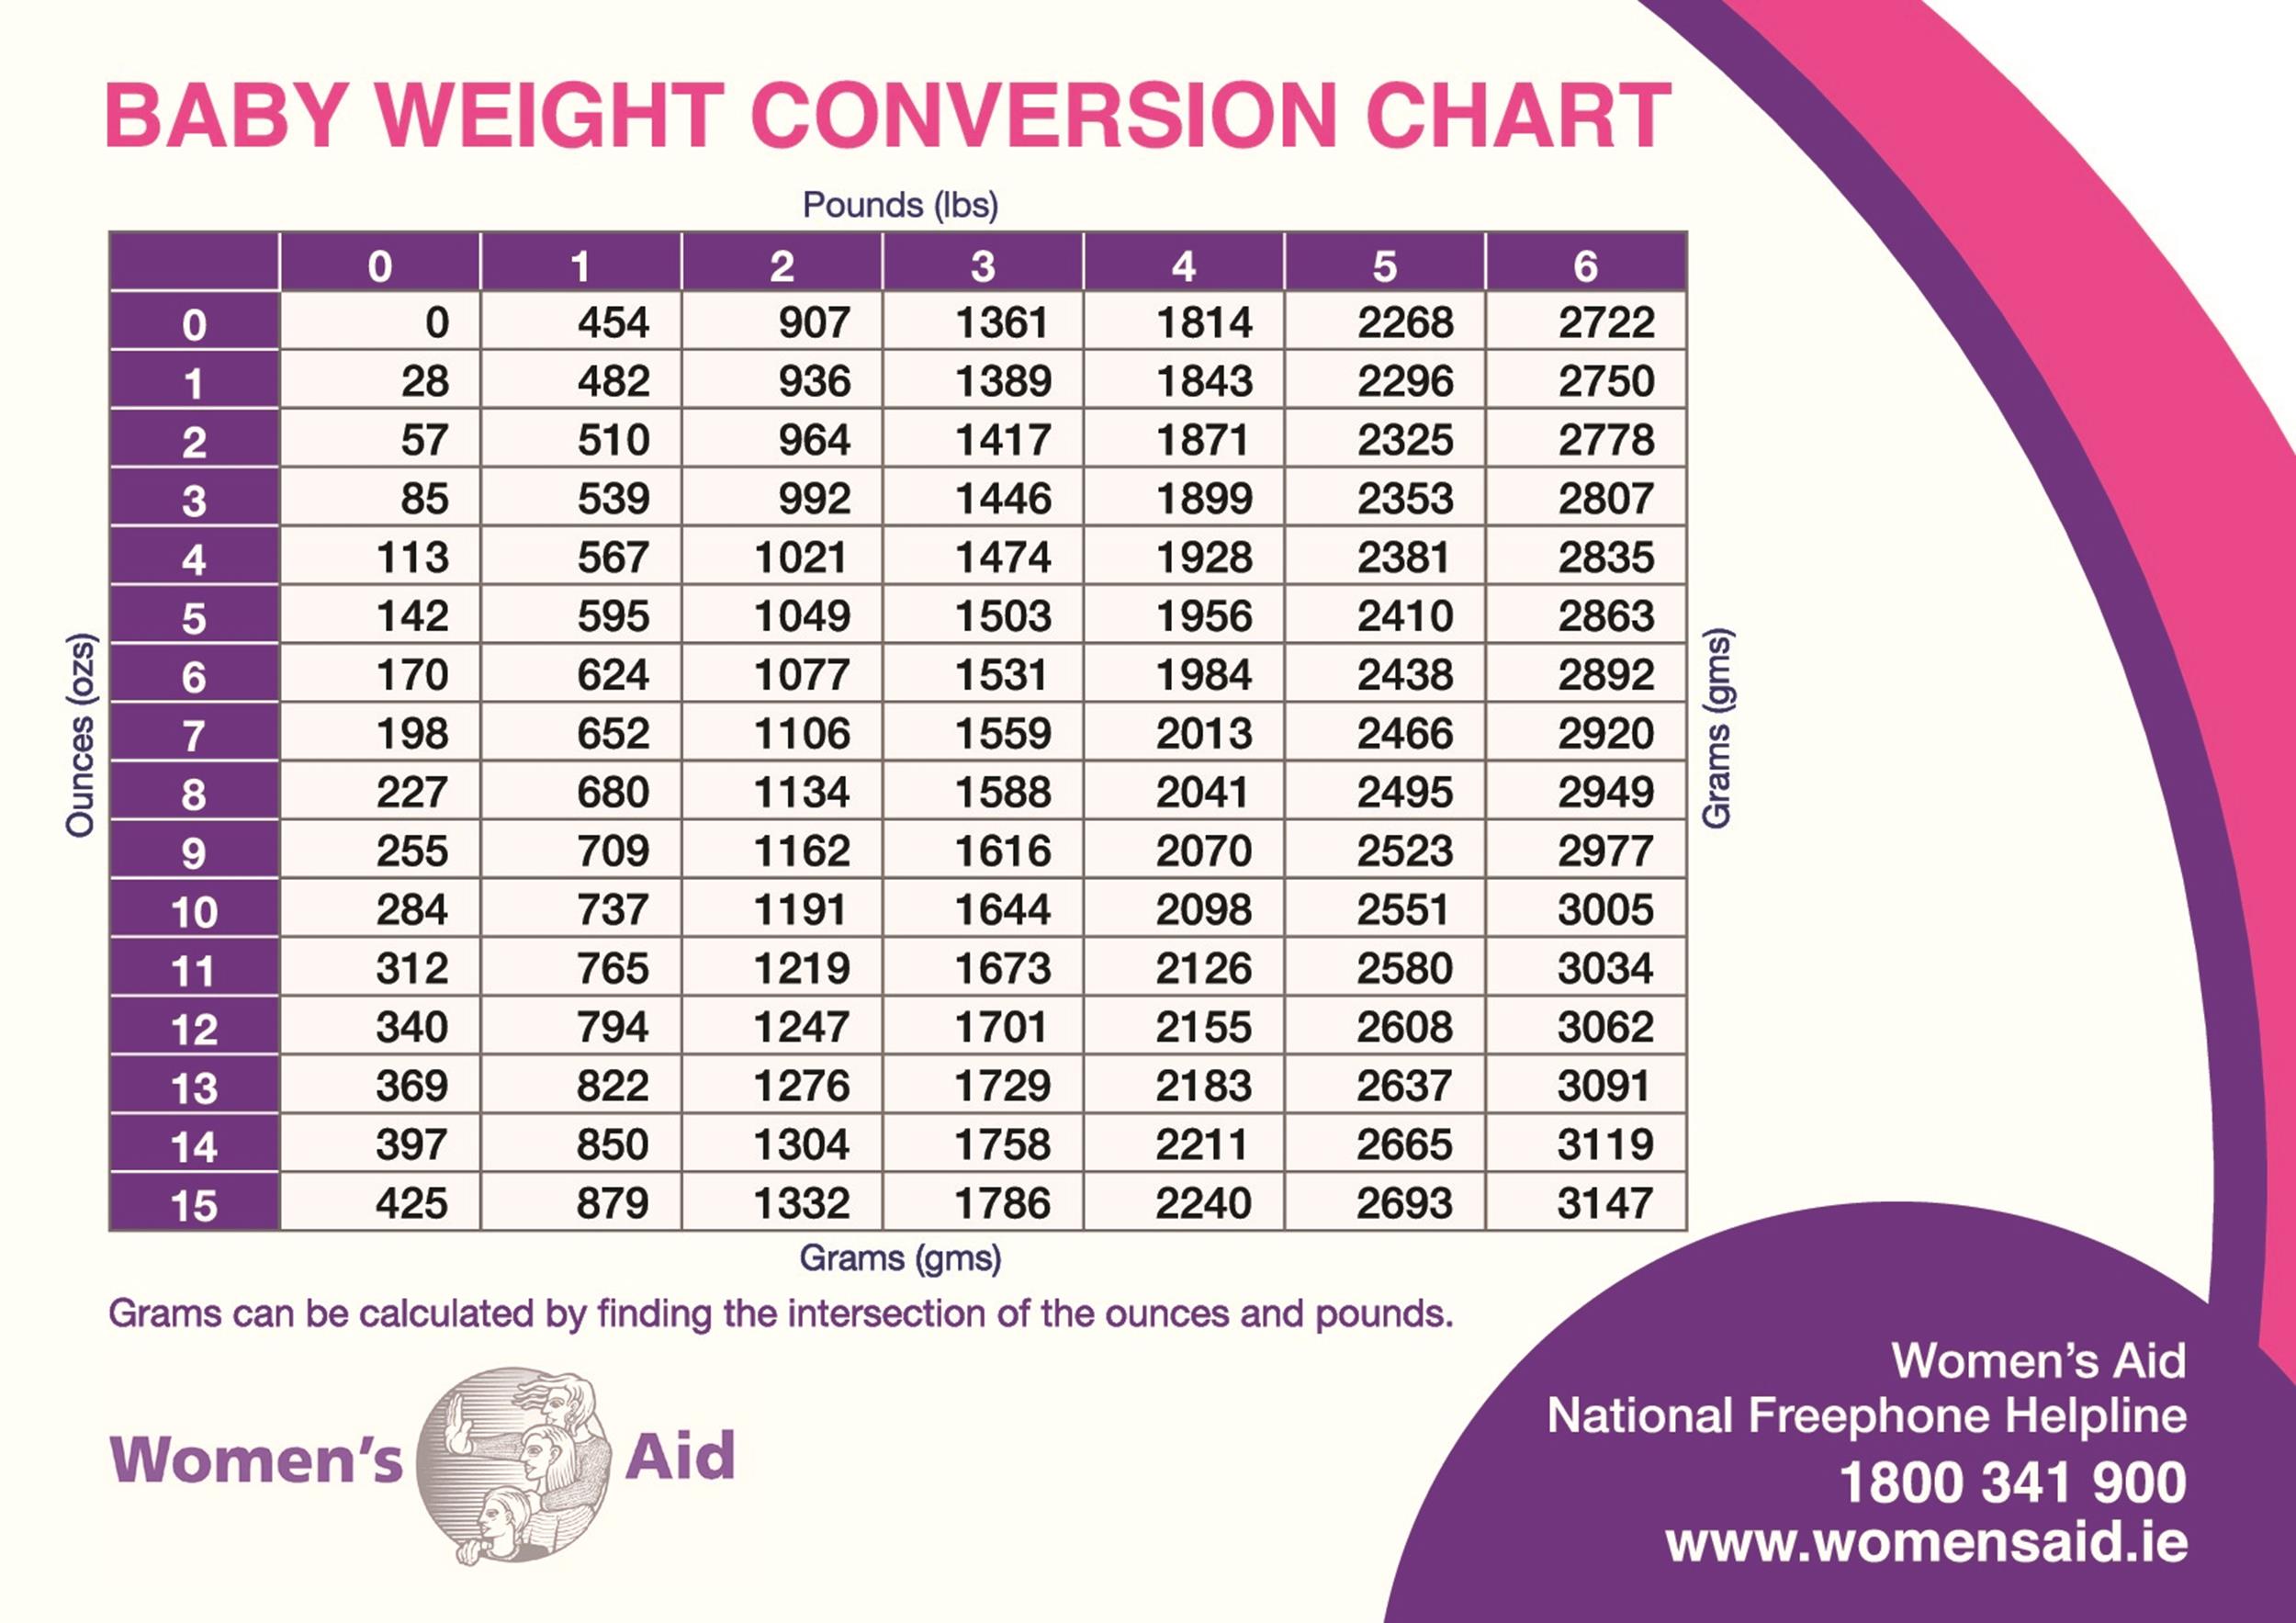 Infant Weight Chart